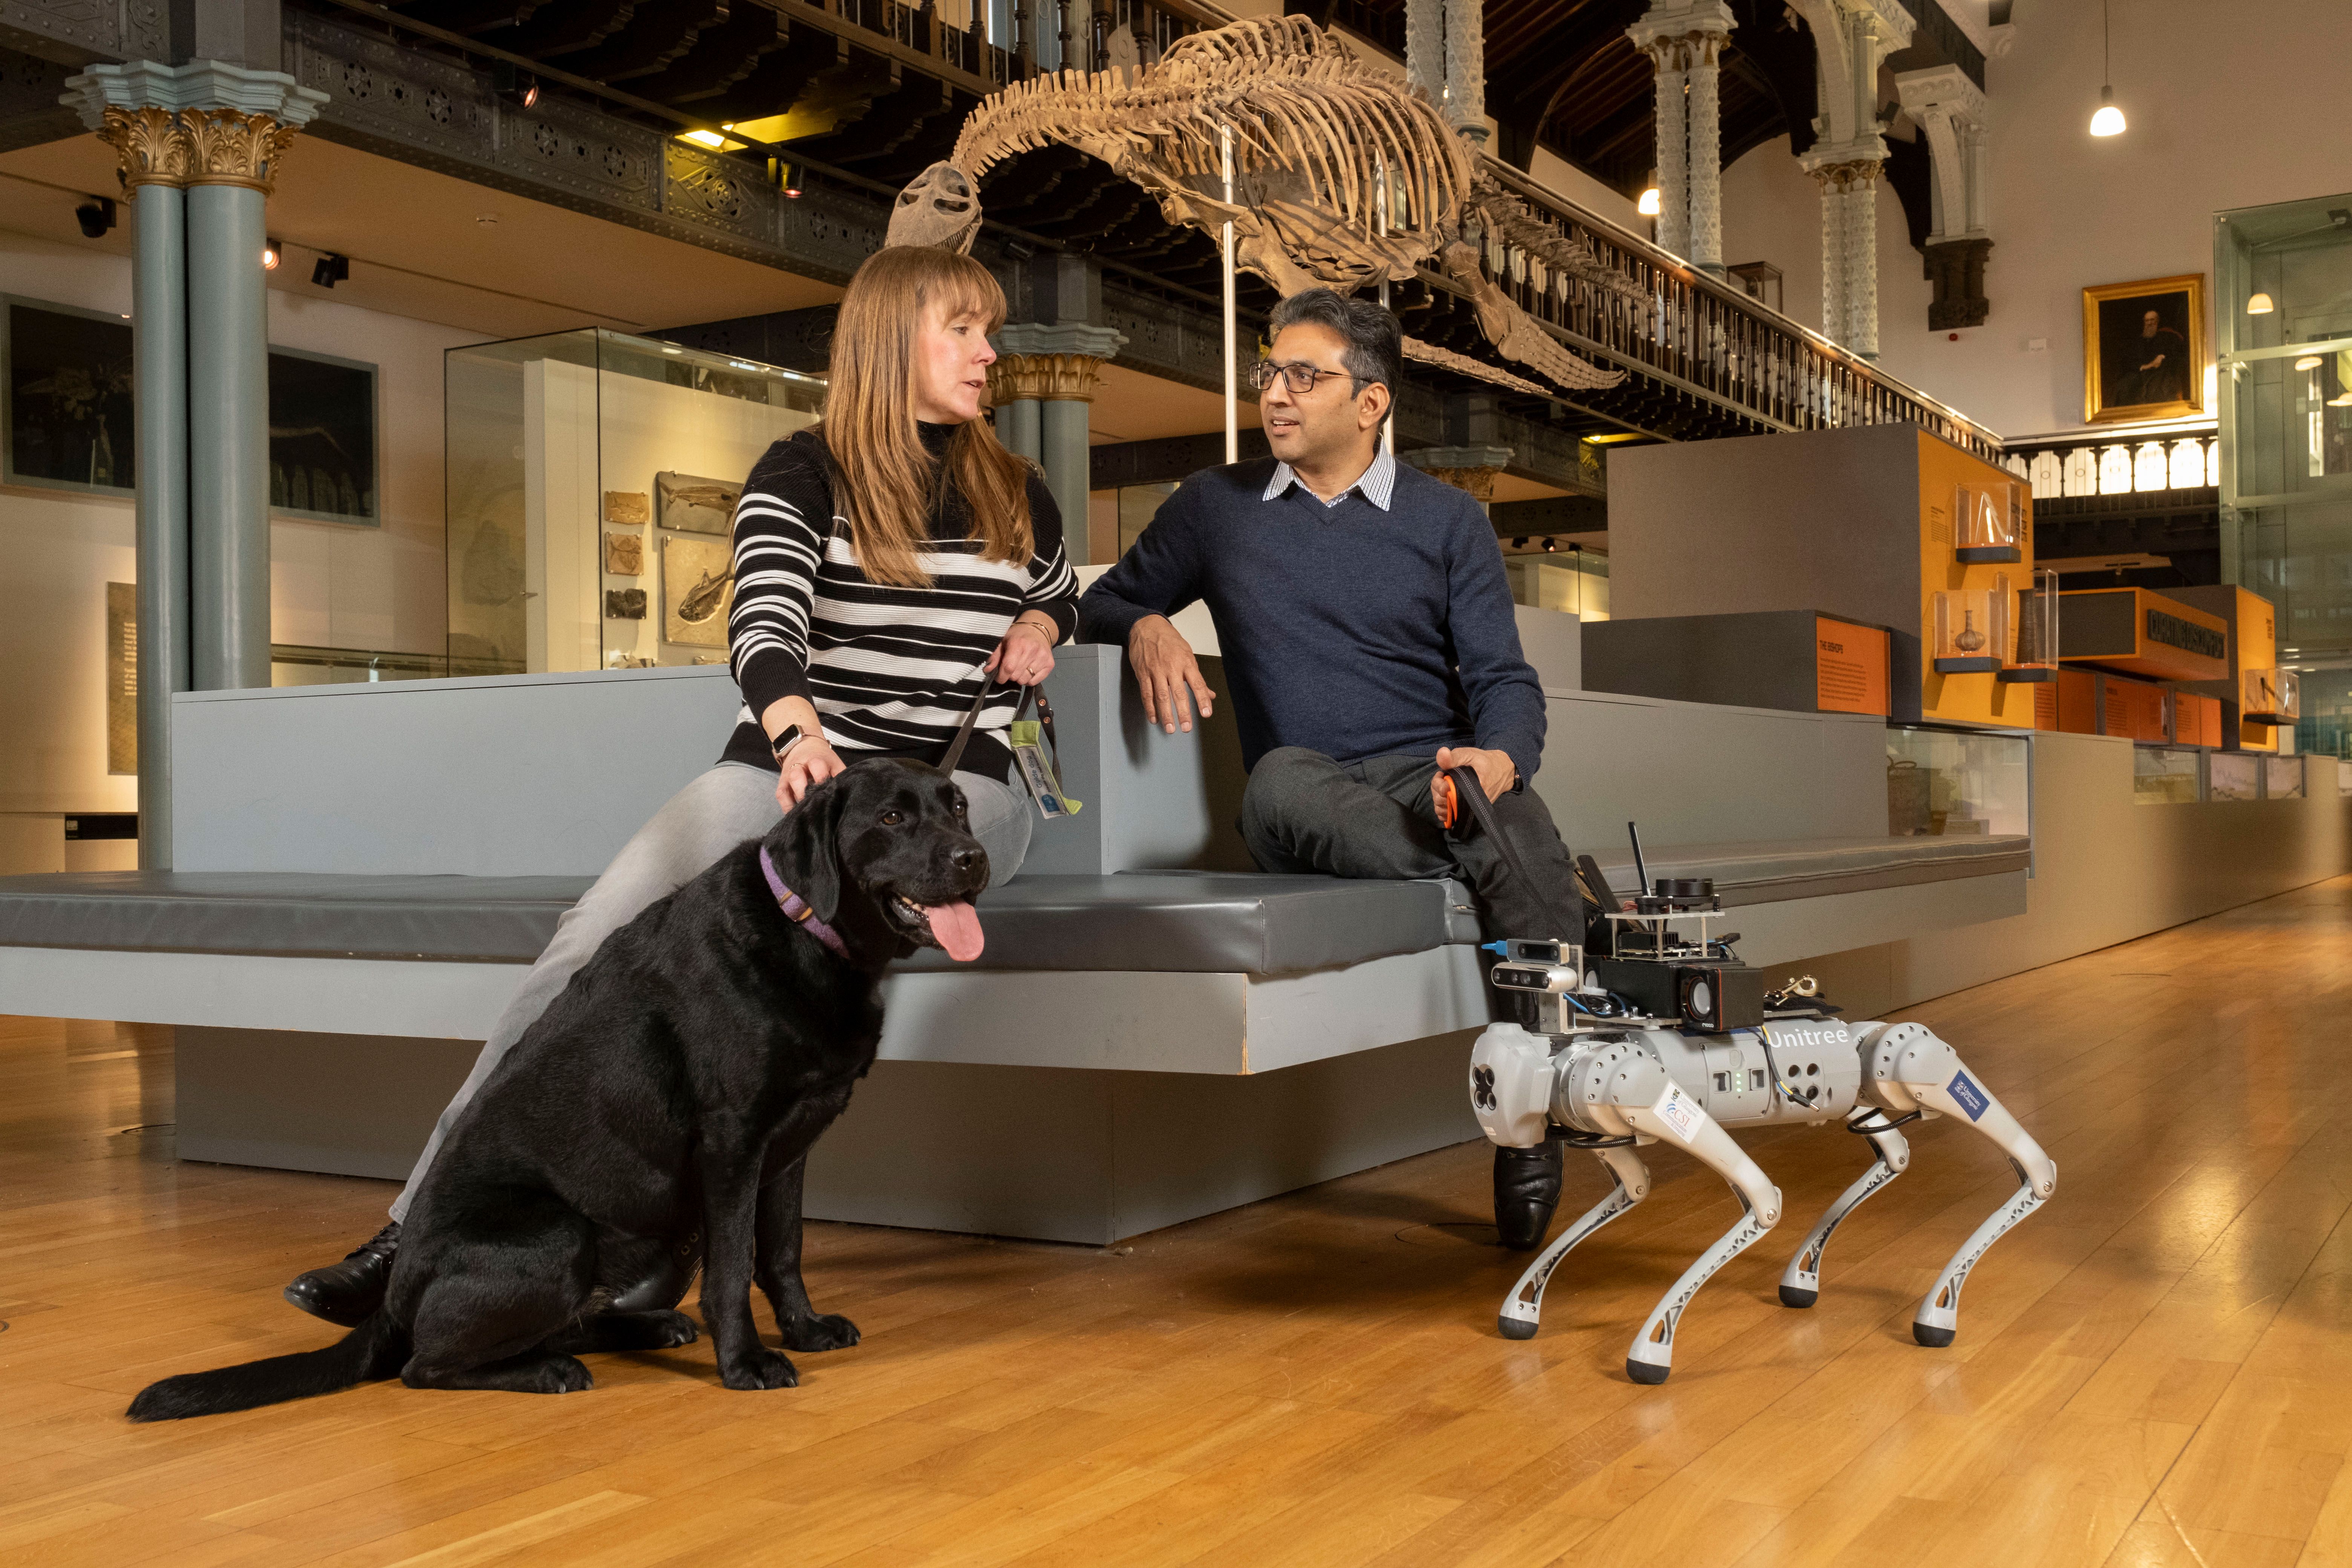 Developers believe the AI-powered dog can bring more independence to visually impaired people. Photo: University of Glasgow.